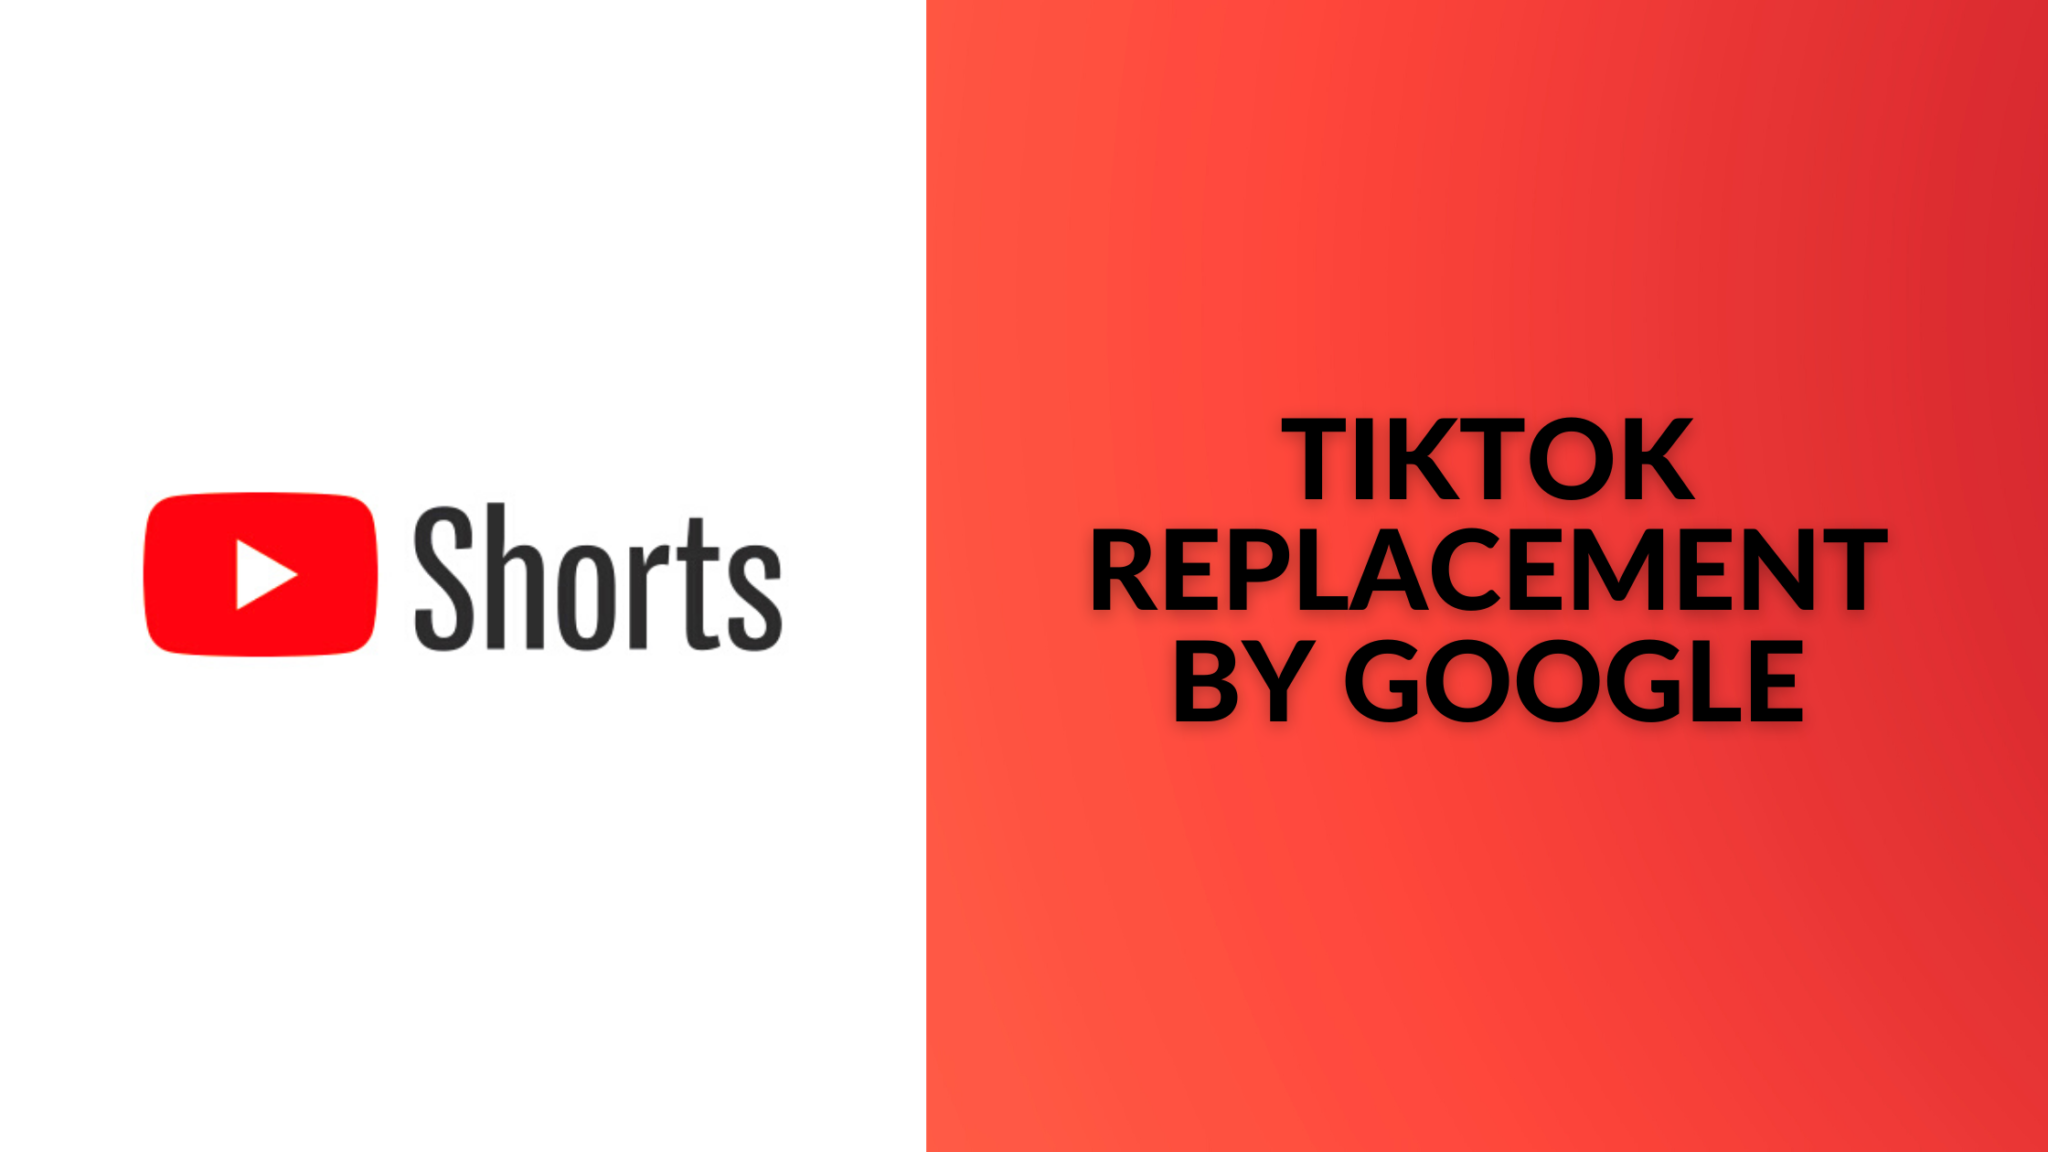 YouTube Shorts - A Tiktok Replacement By Google - Theimagefreak.com